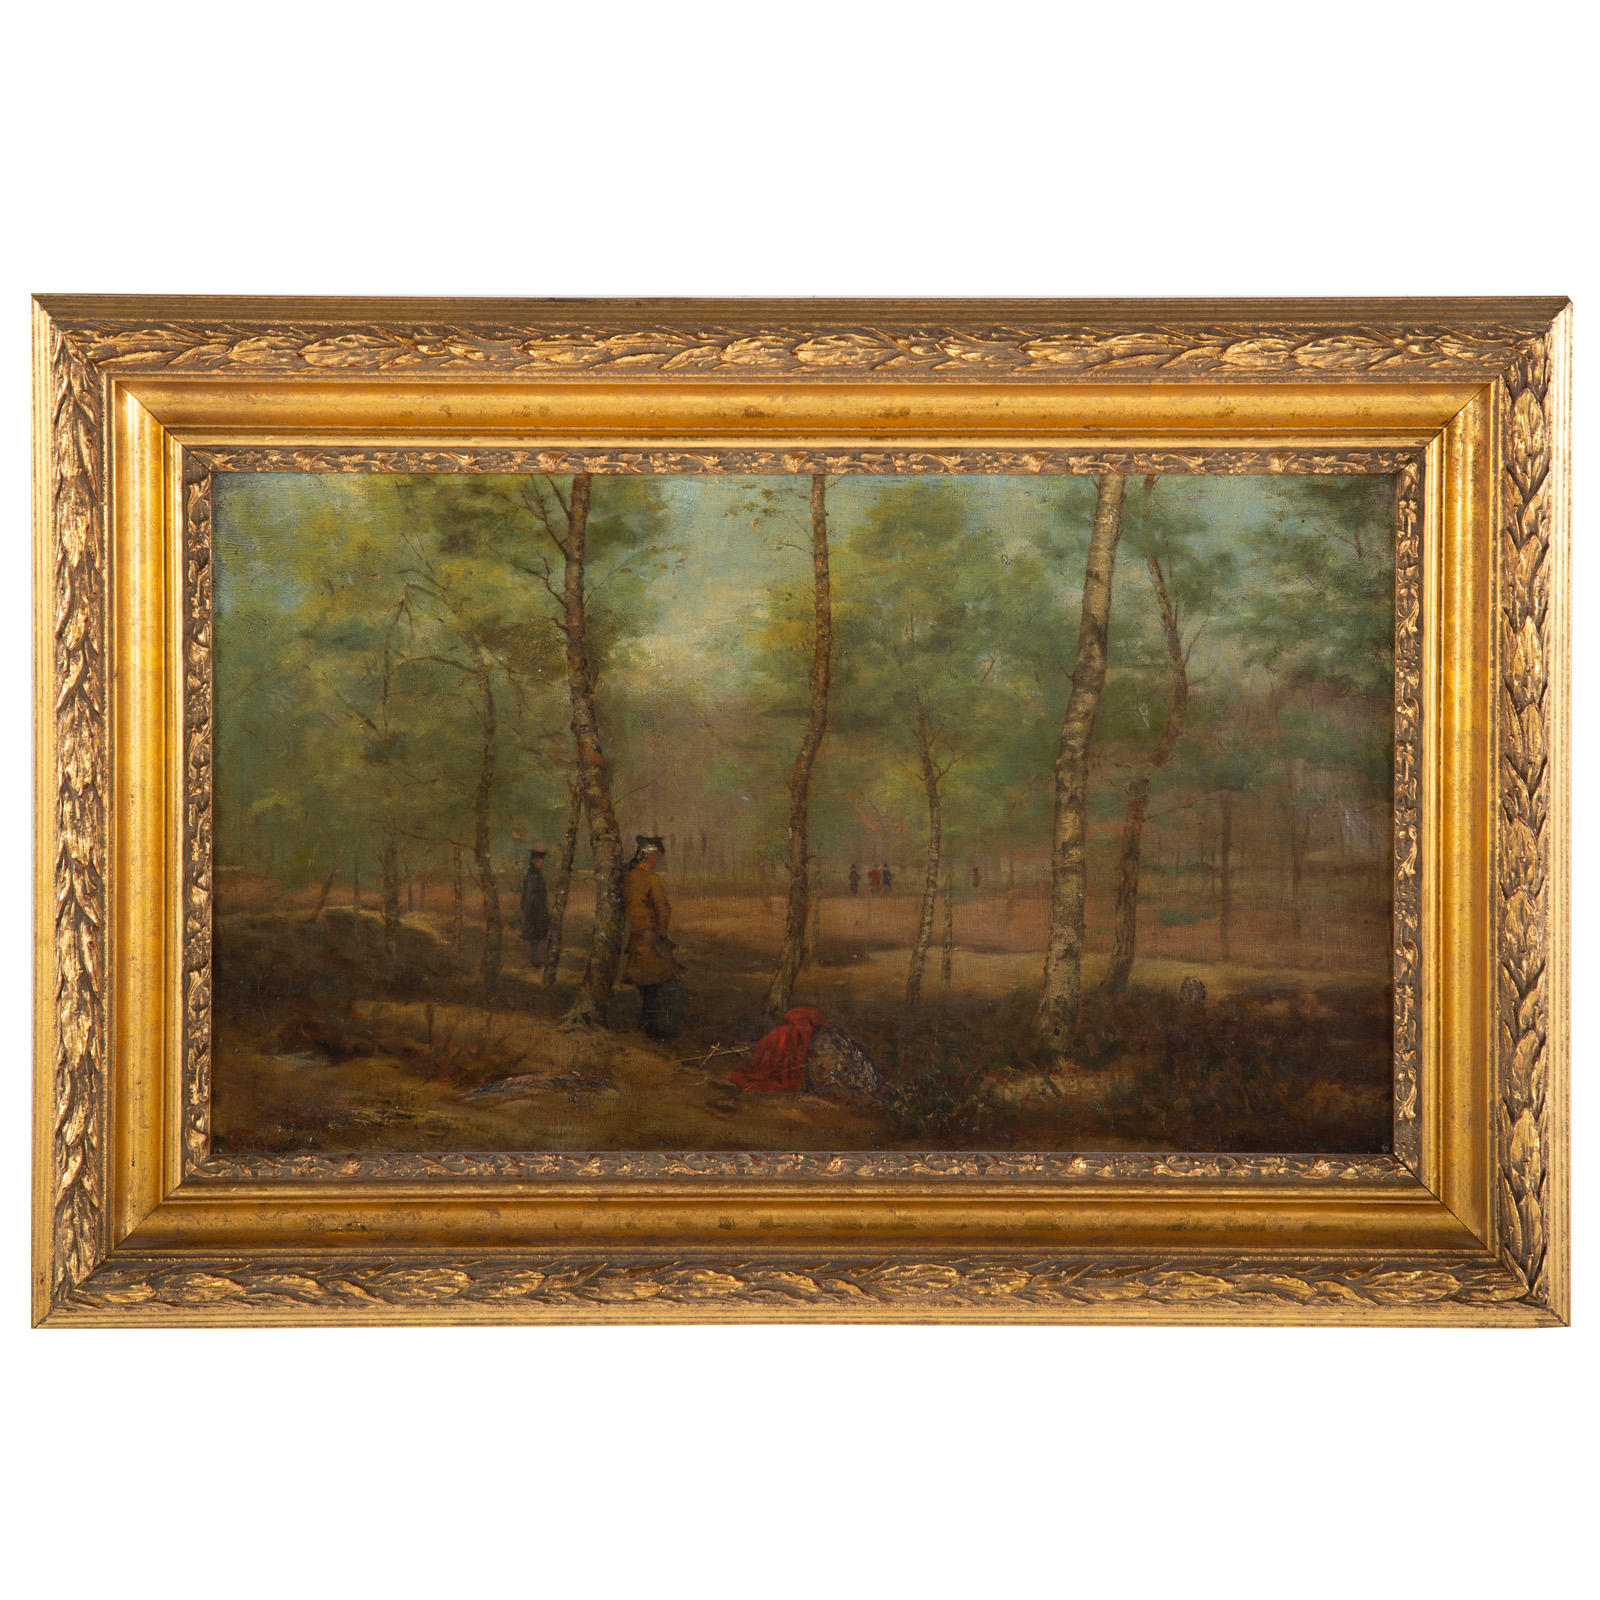 F. TAYLOR. FIGURES IN A FOREST,